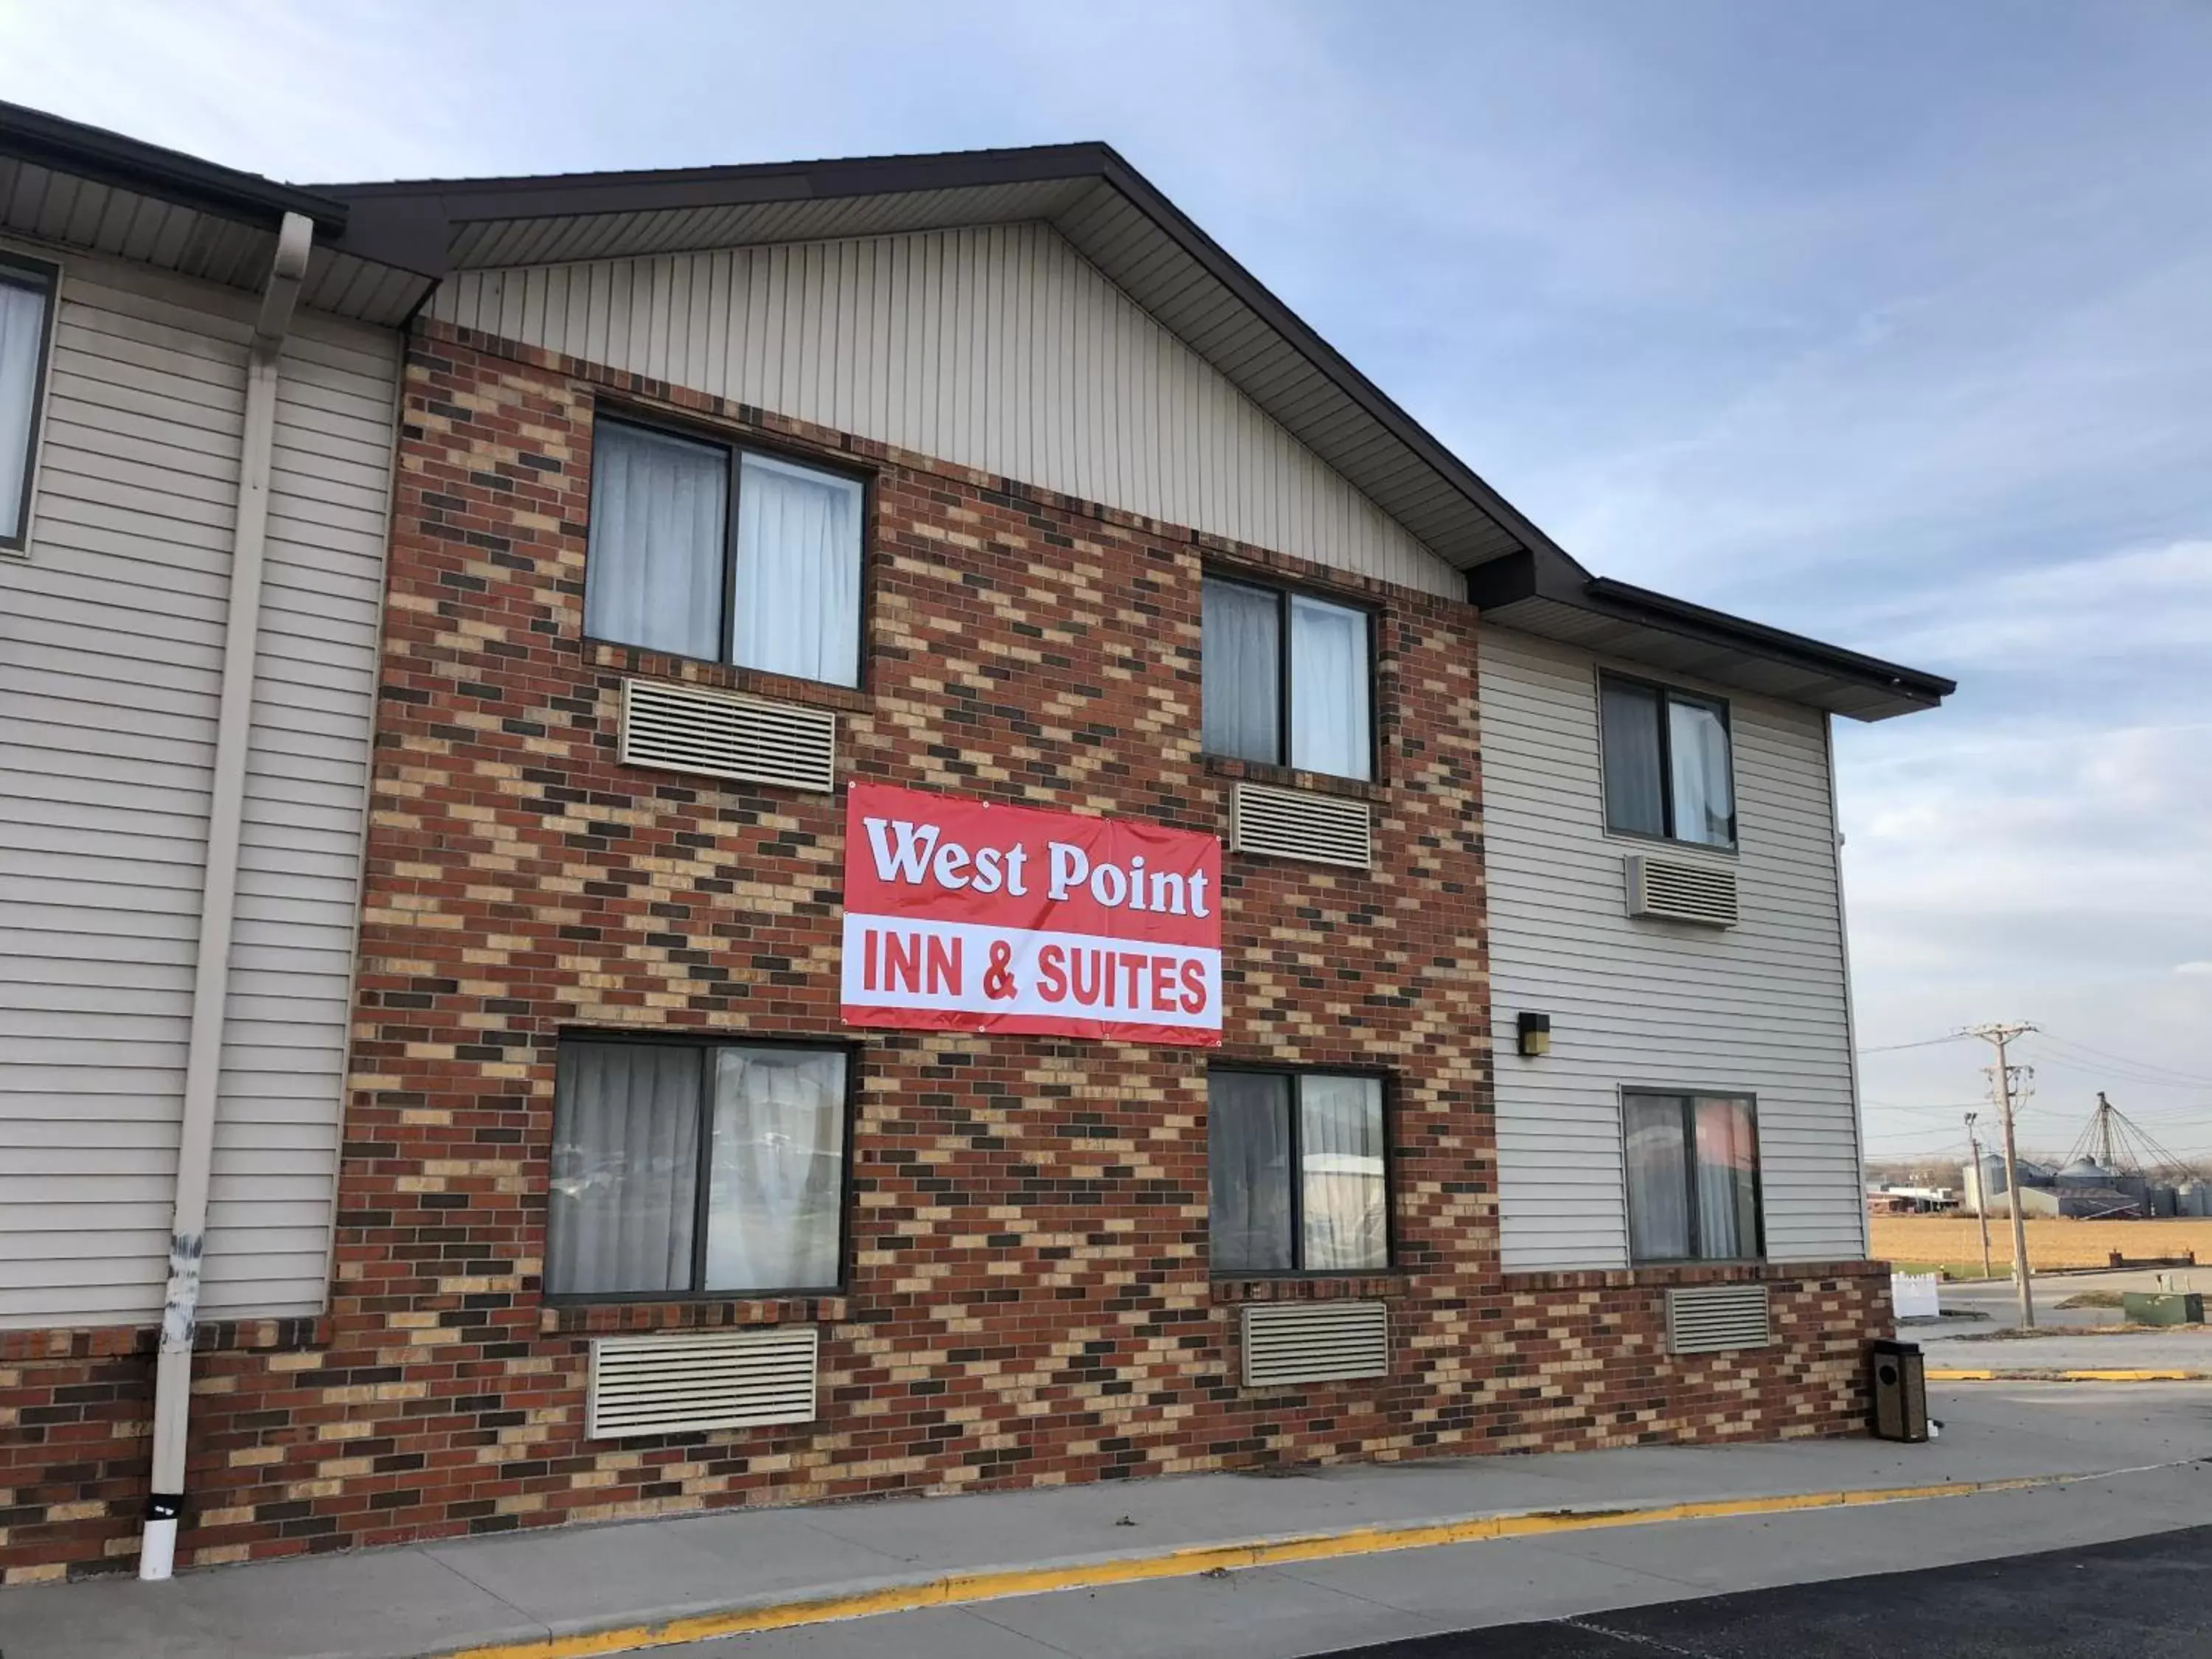 Property Building in West Point Inn & Suites